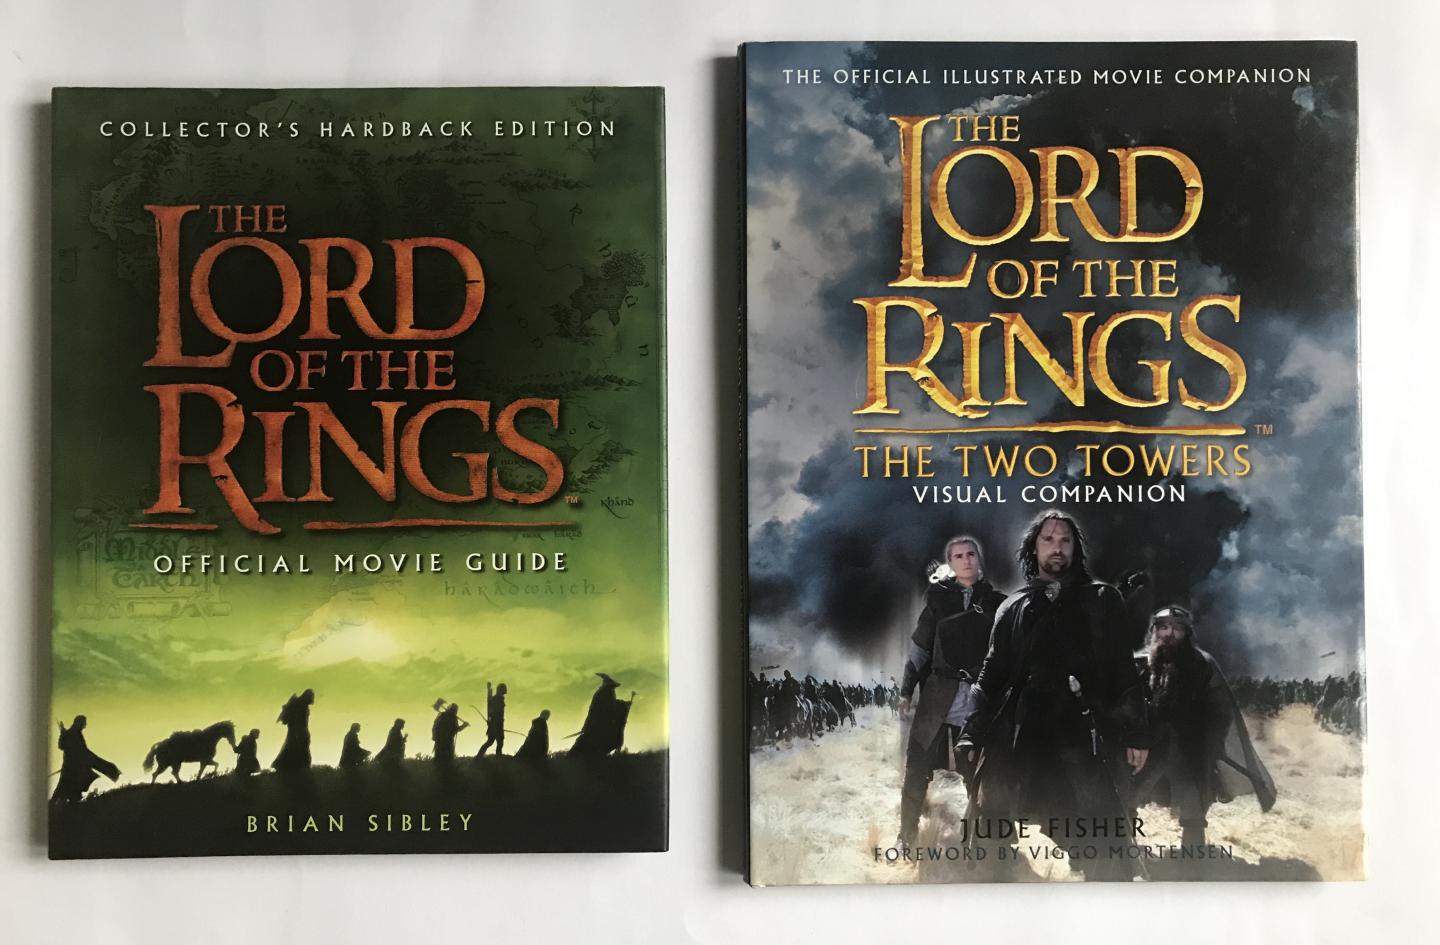 Sibley, Brian, Fisher, Judy - 2 boeken: The Lord of the Rings: Official Movie Guide (Collector's hardback edition) & The Two towers - Visual Comanion